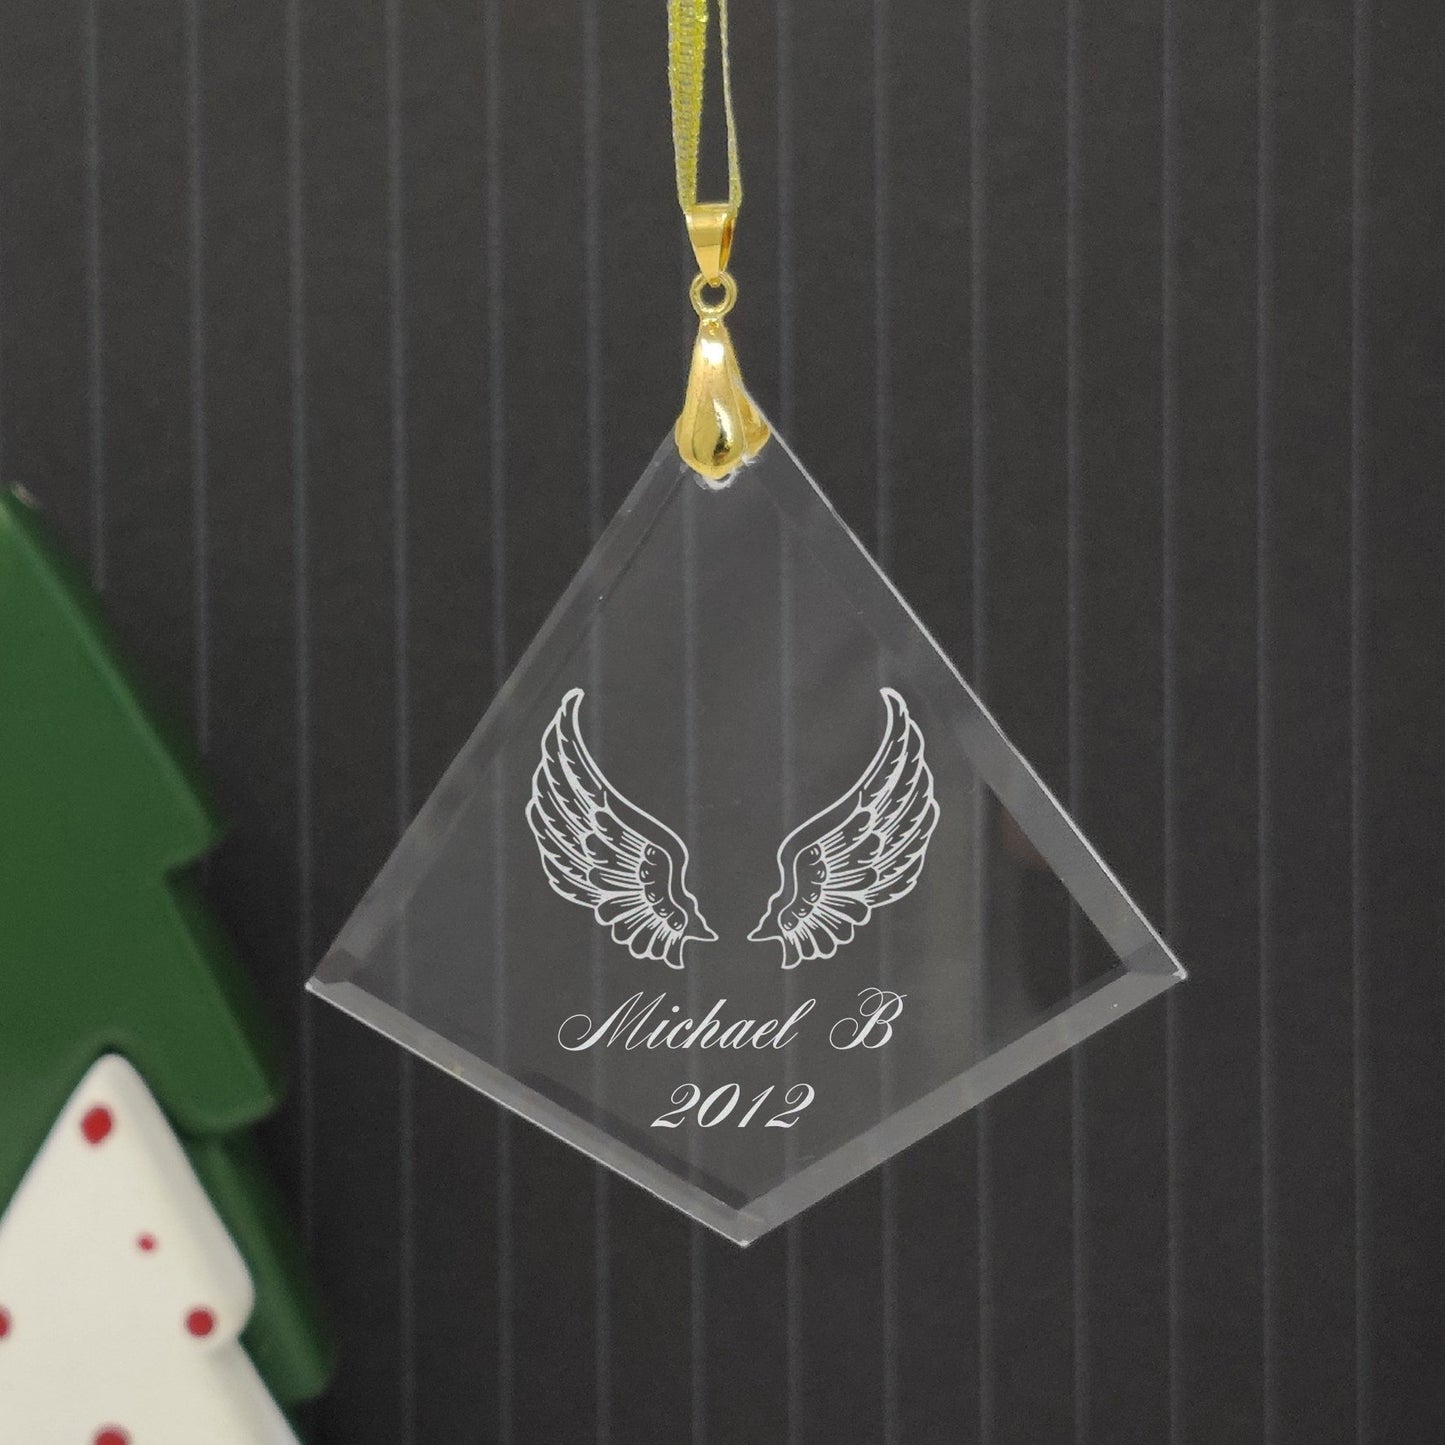 LaserGram Christmas Ornament, High Wing Airplane, Personalized Engraving Included (Diamond Shape)